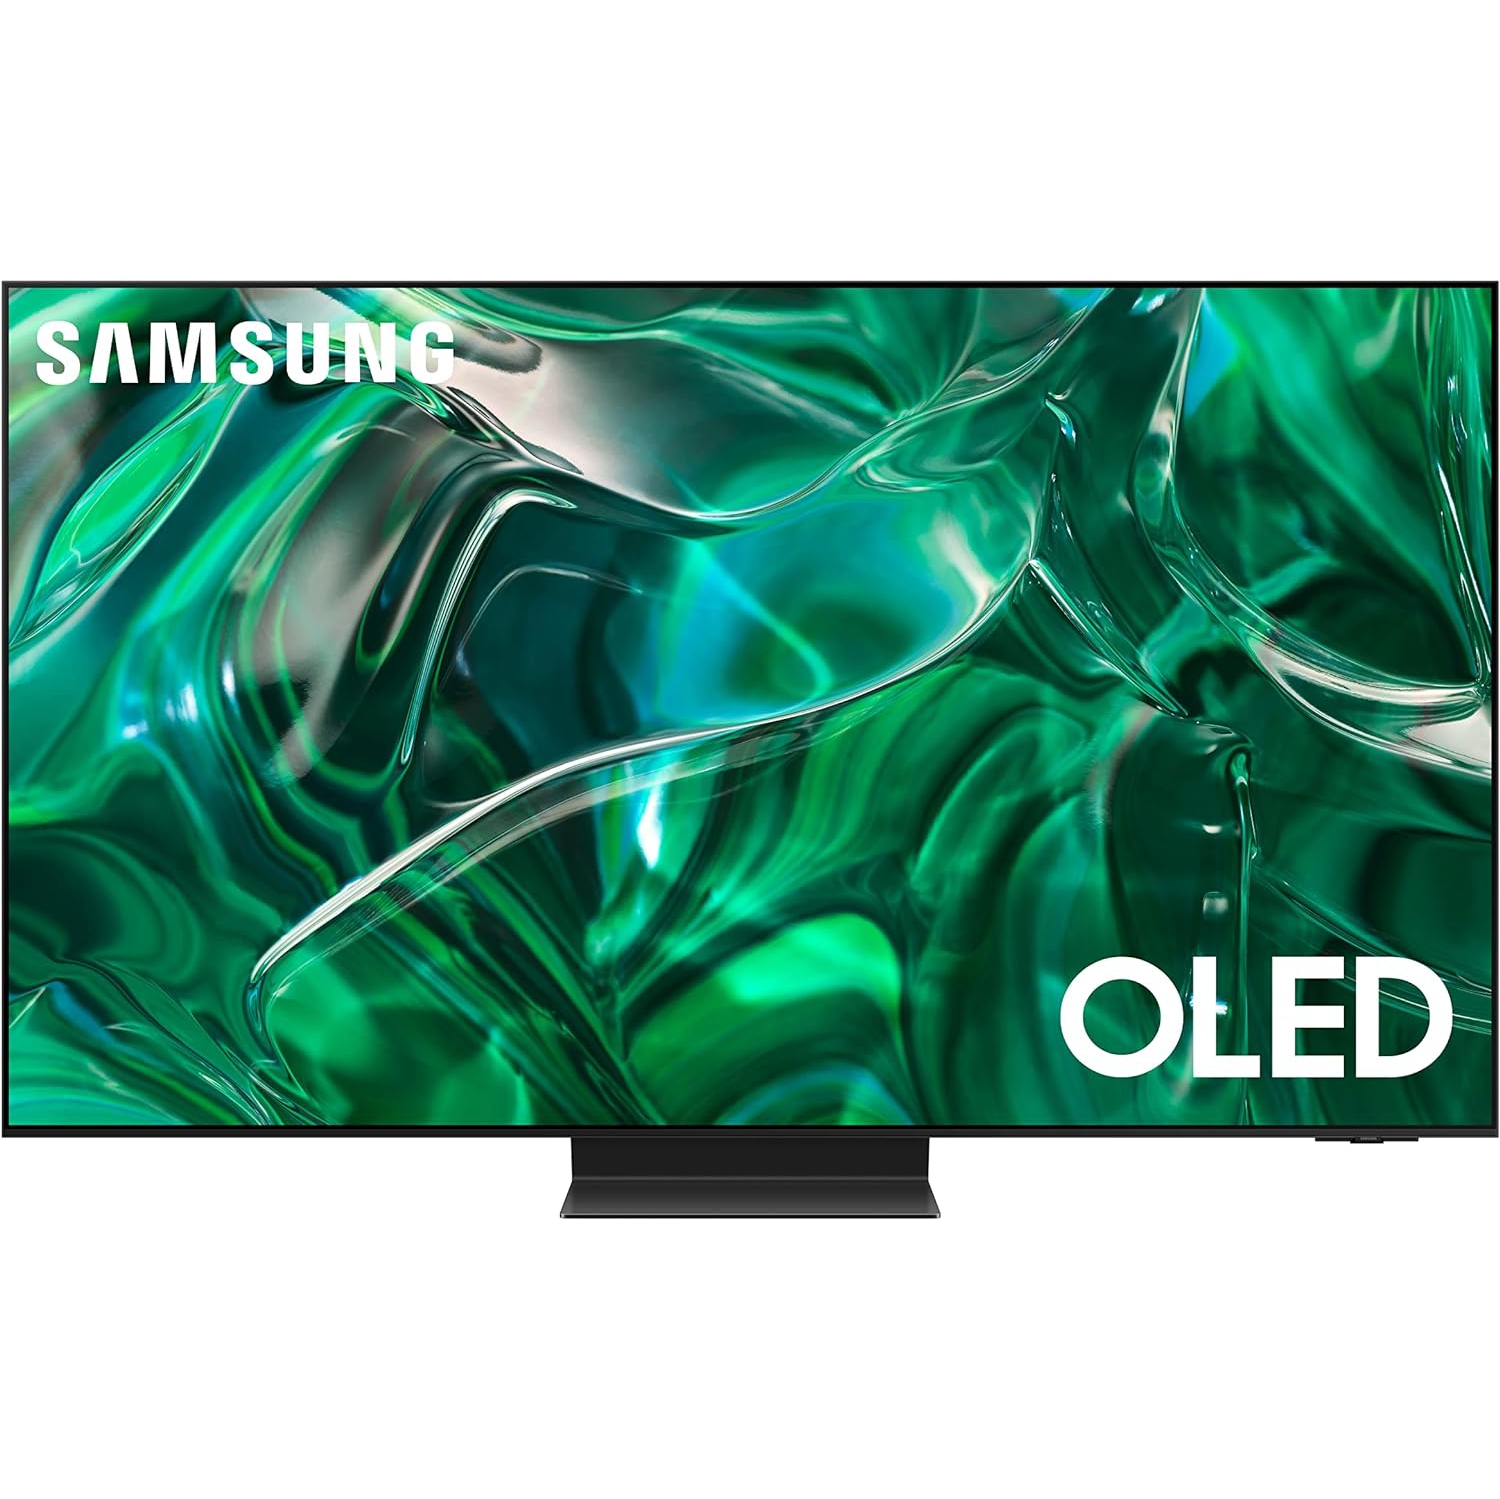 SAMSUNG 77-Inch Class OLED 4K S95C Series, Quantum HDR, Object Tracking Sound+, Q Symphony, Gaming Hub, w/Alexa Built-in - Open Box - 10/10 Condition